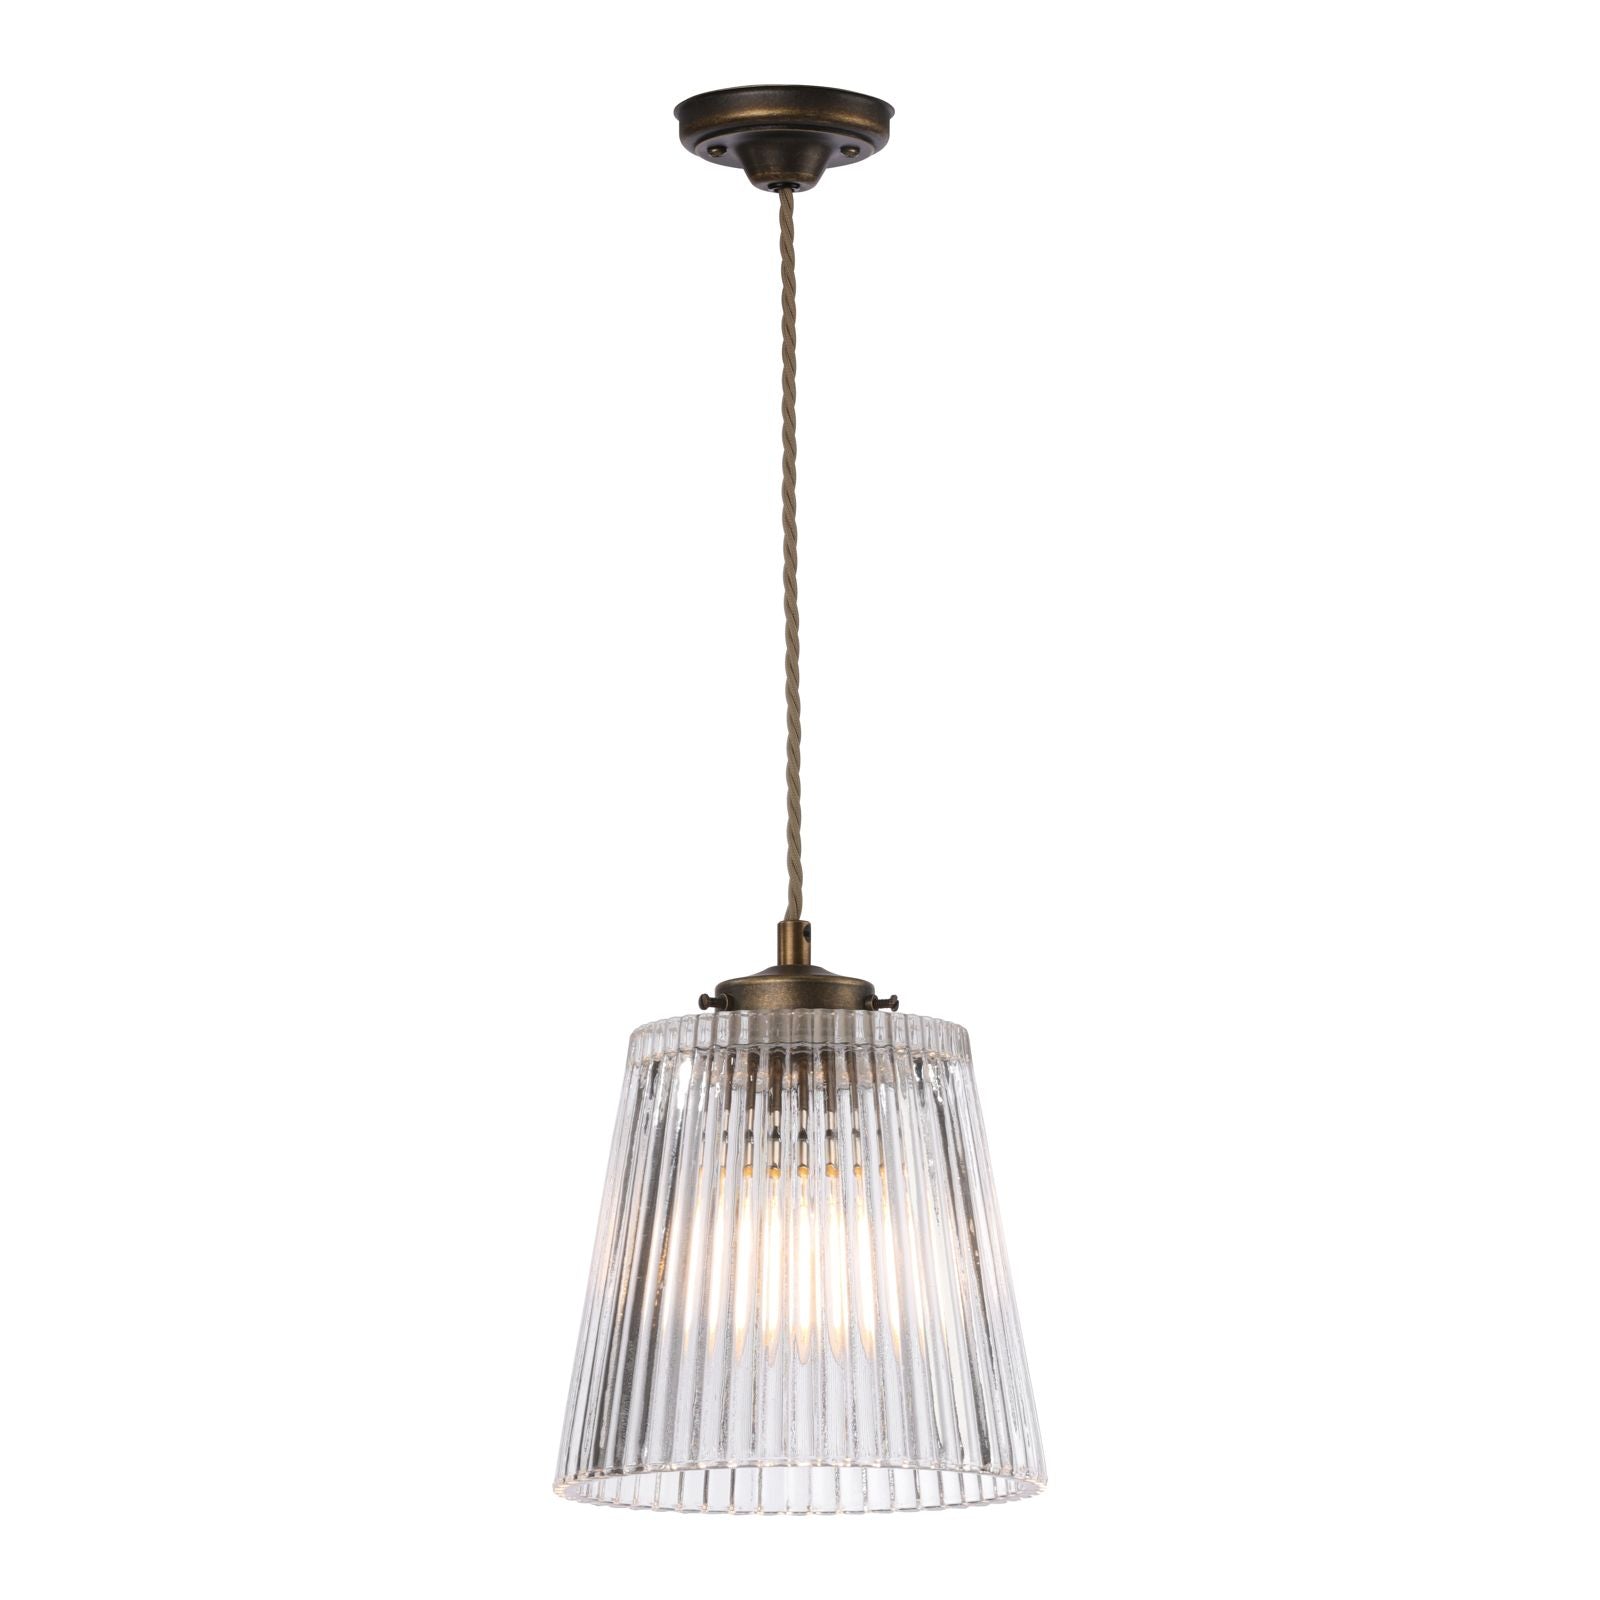 Odell Small/Large Single Pendant -  Antique Brass Finish